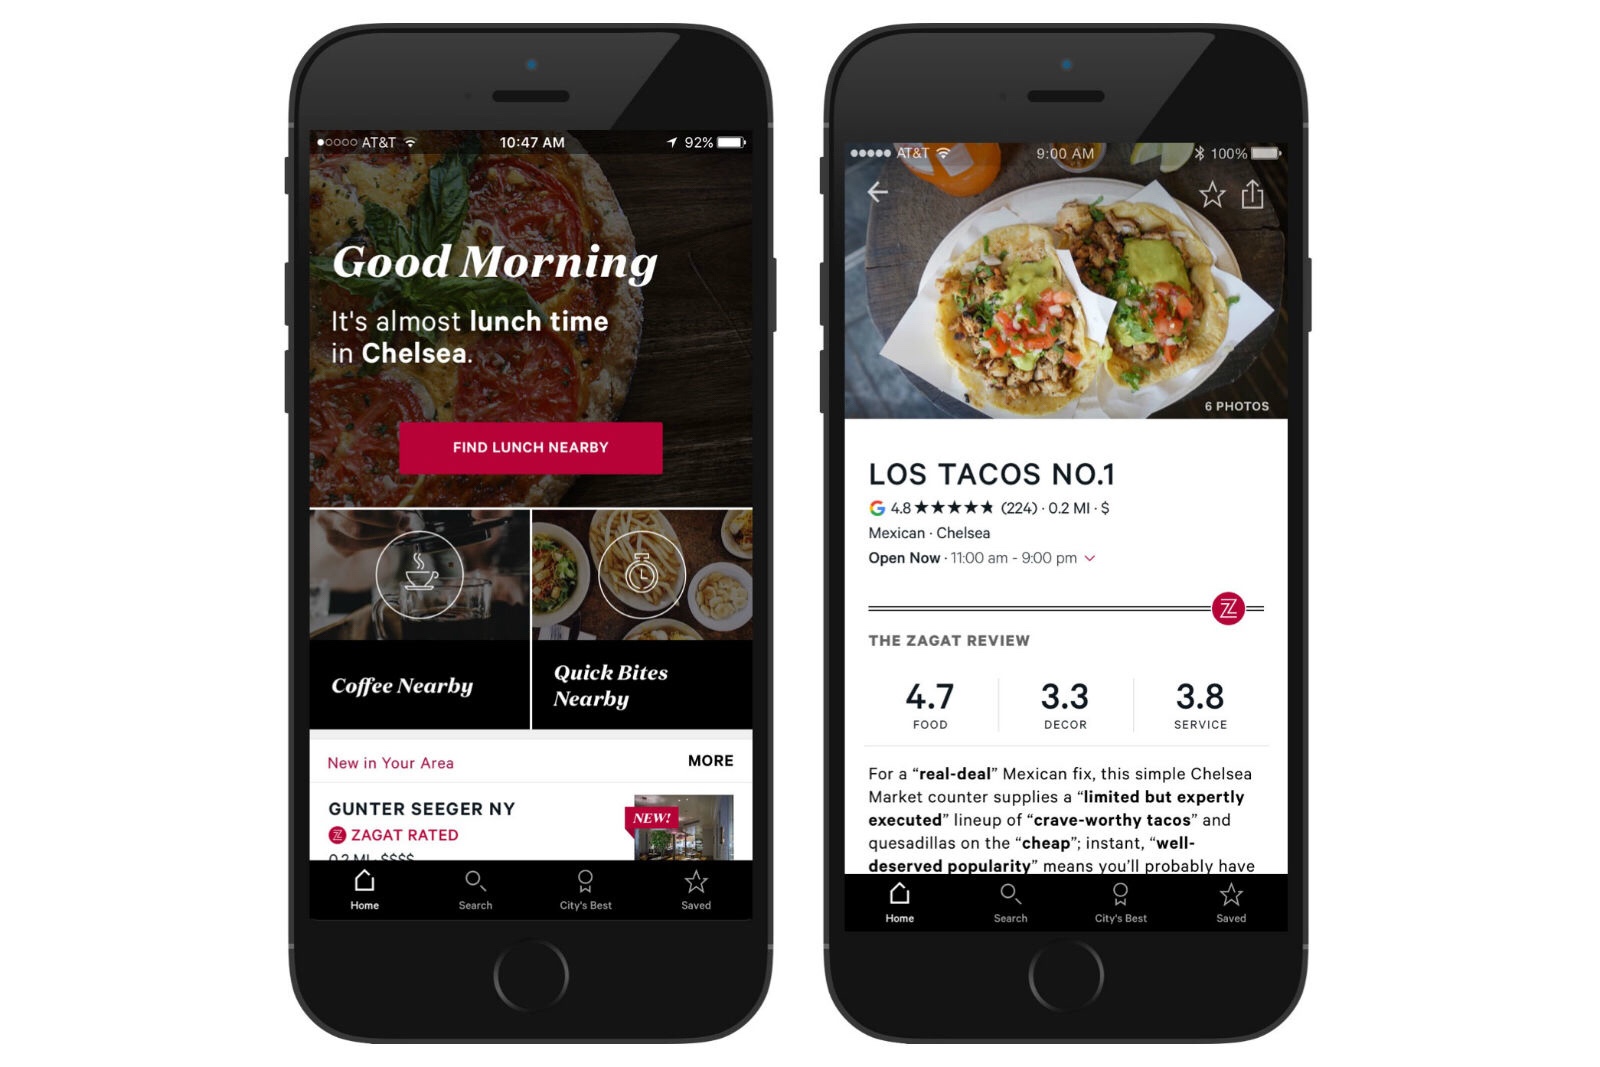 Google sells restaurant review service Zagat to The Infatuation